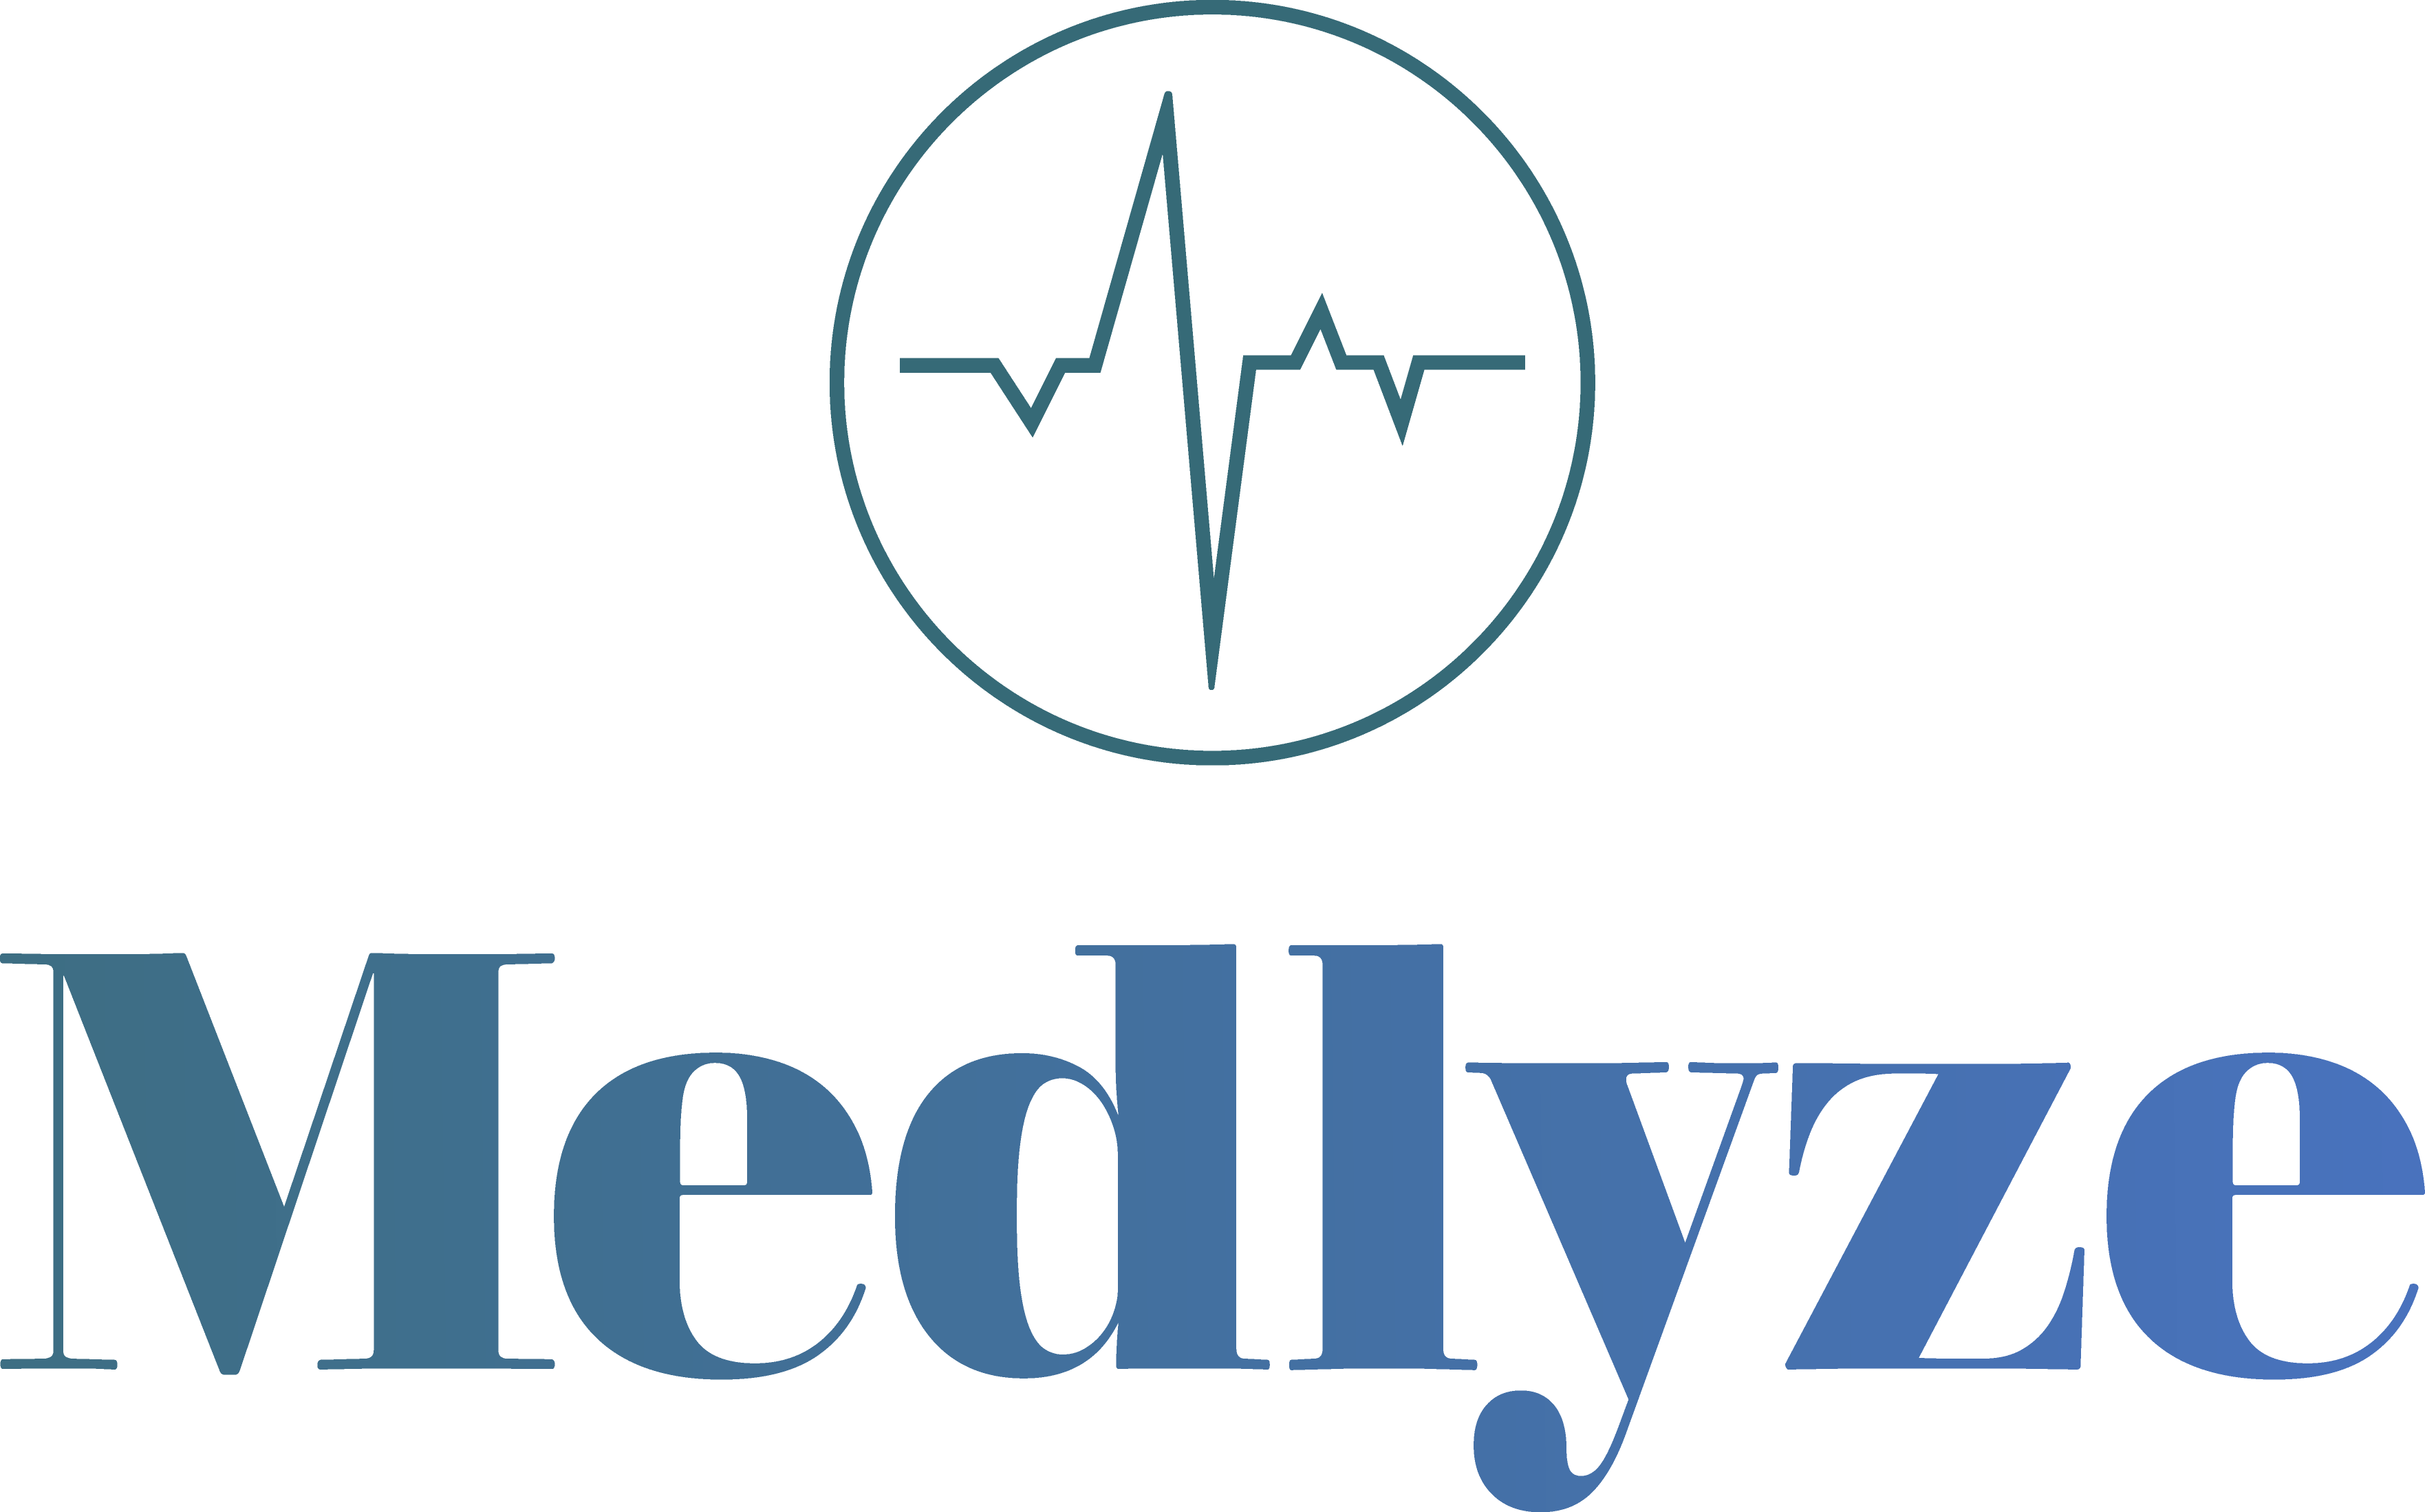 Medlyze - Price Transparency Data and Analysis for the Healthcare Industry